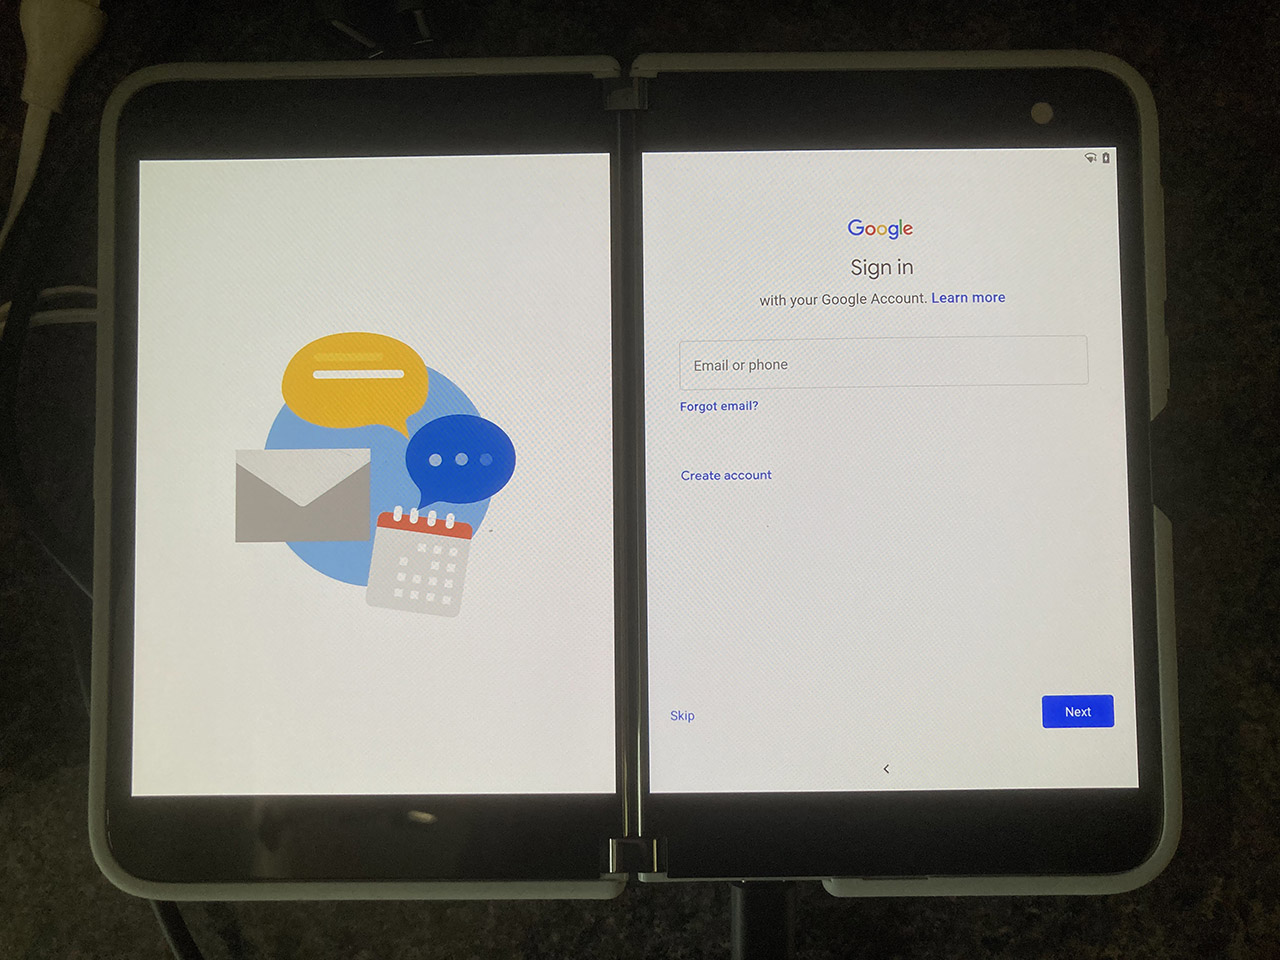 Microsoft Surface Duo - Sign in to Google